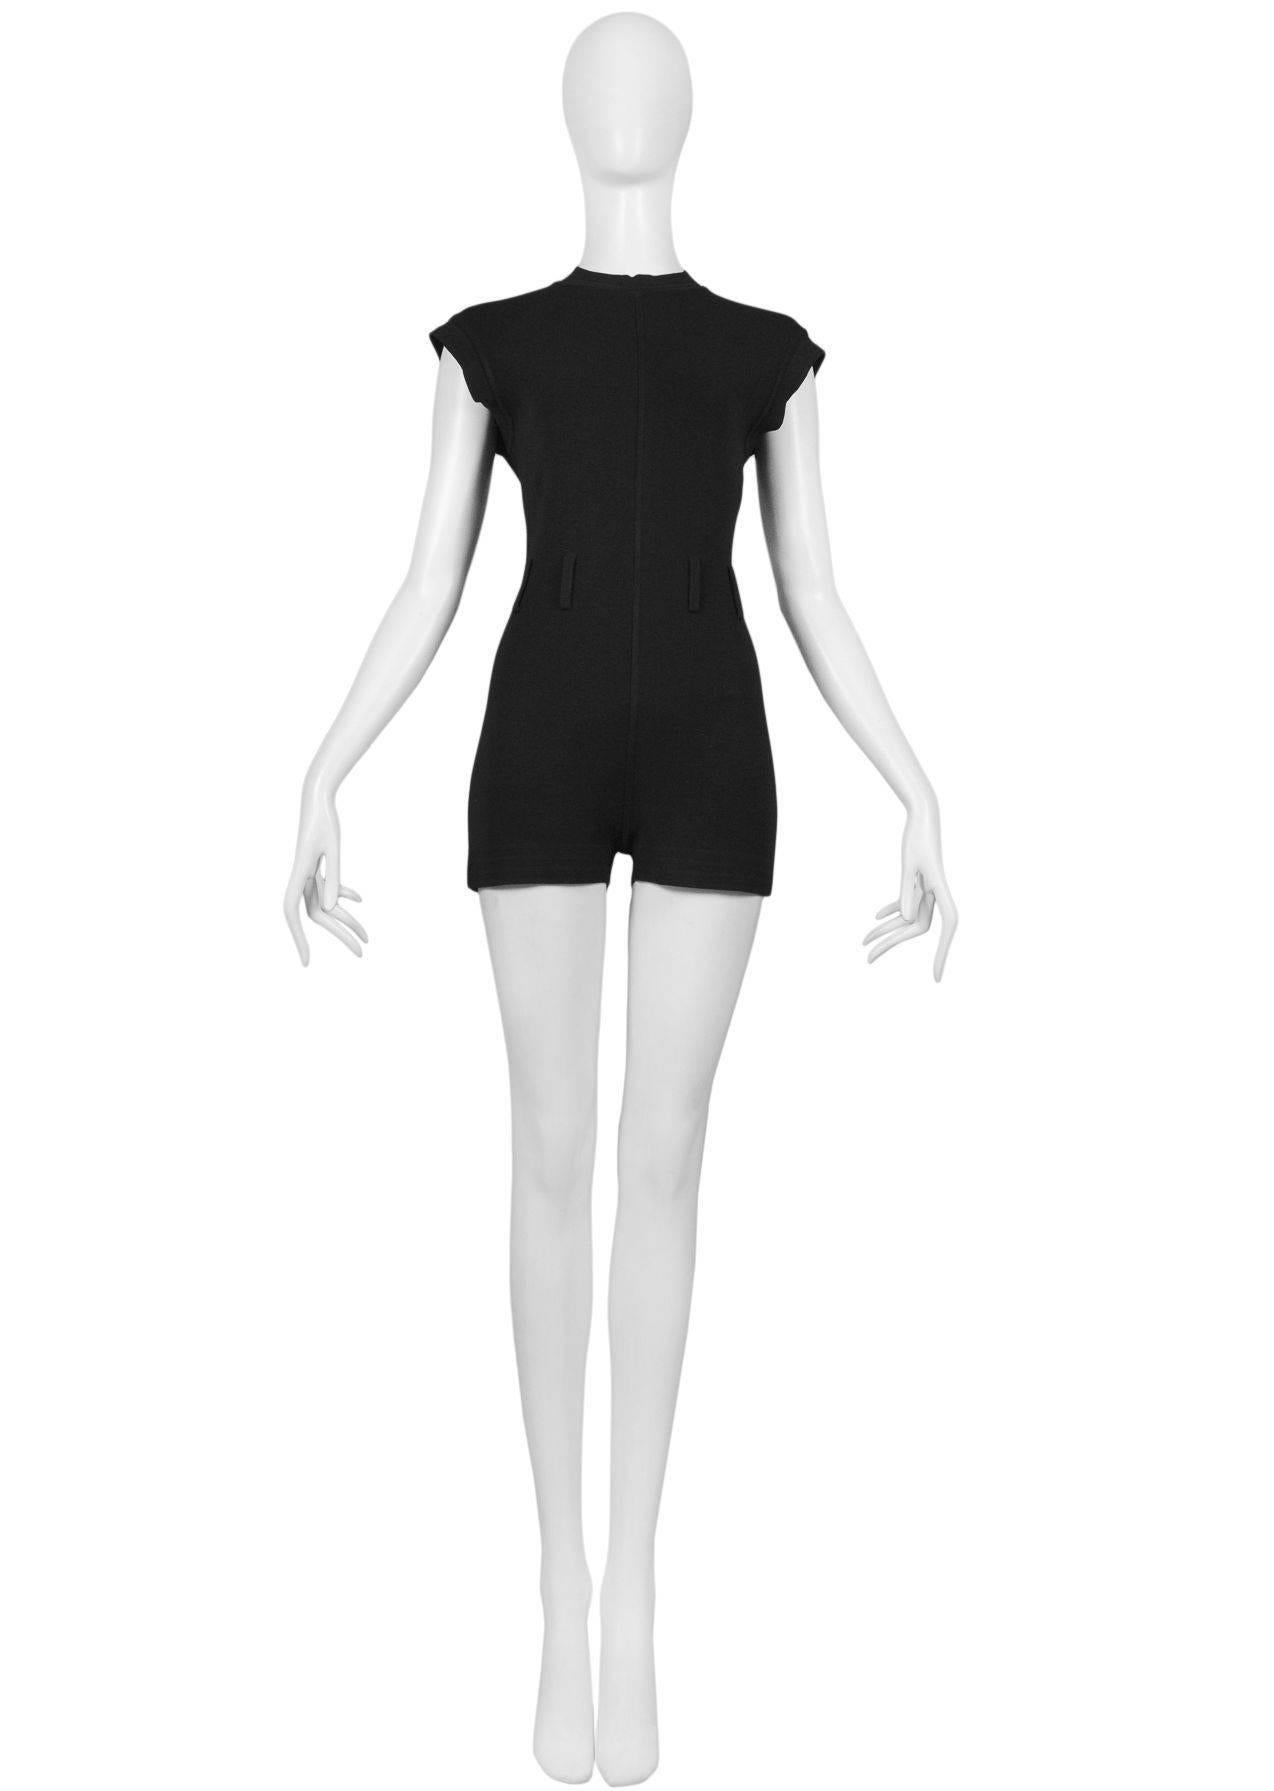 Vintage Azzedine Alaia black knit mini shorts romper. This piece features graphic seaming lines and cuff details, zipper at back, and belt loops at the waist. Fitted body with strong stretch. Iconic 1990's silhouette. 